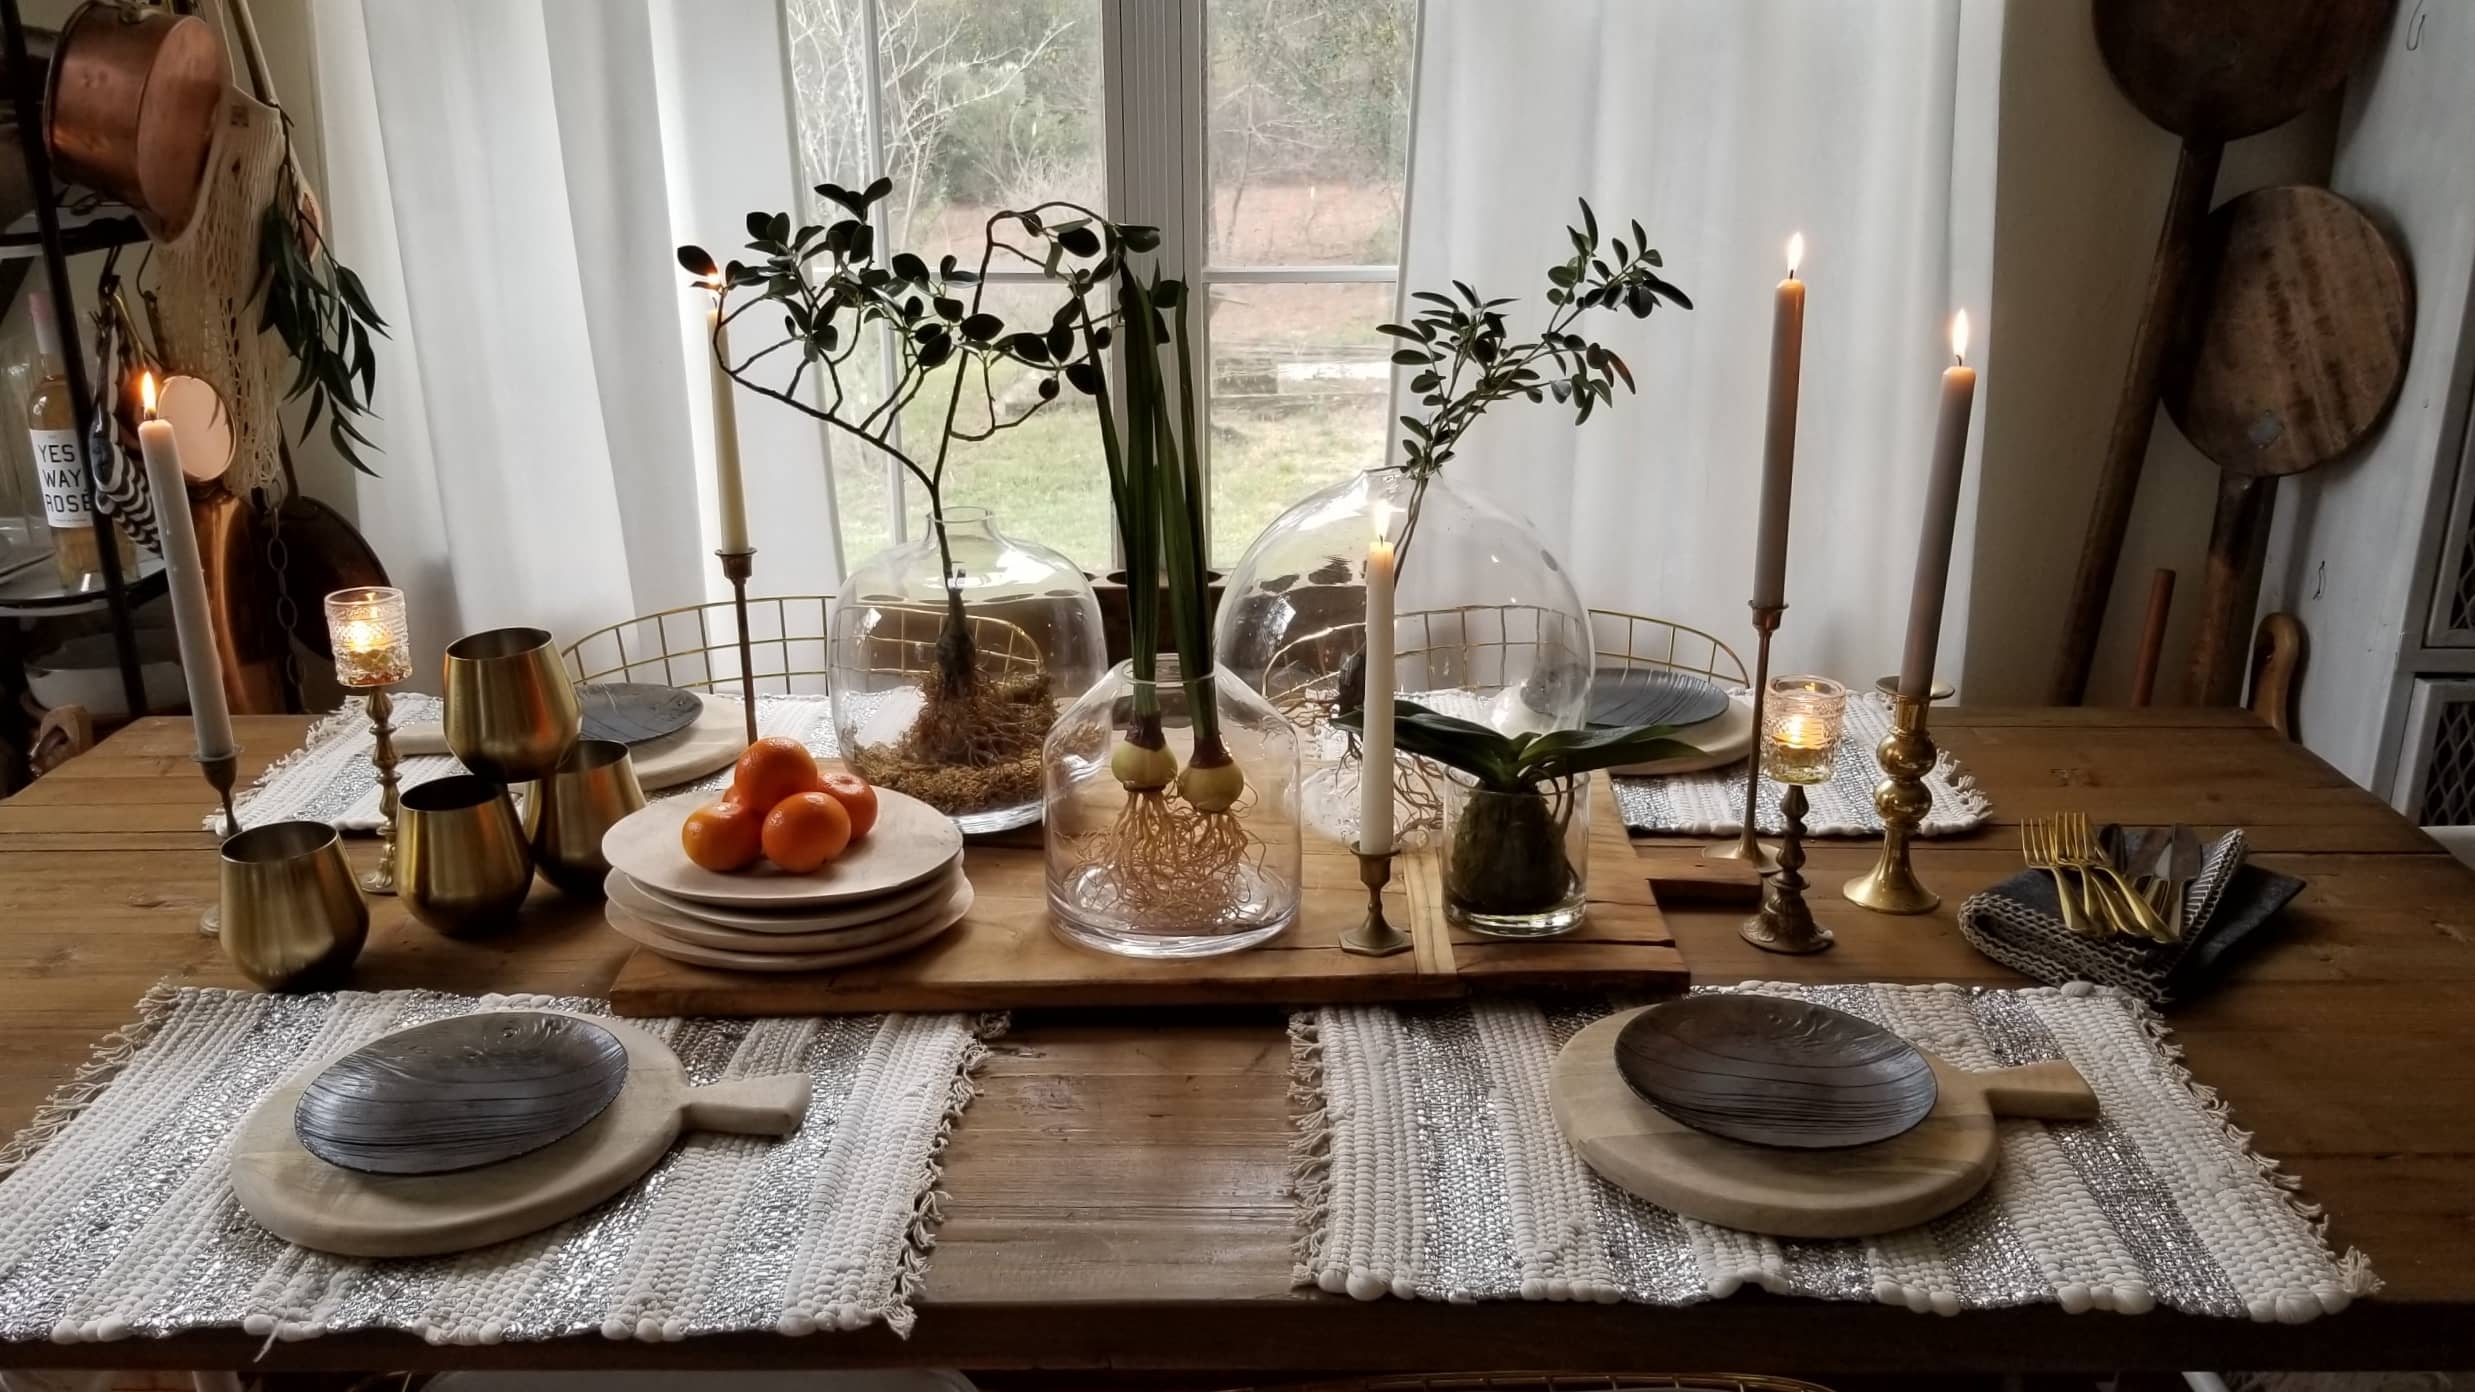  Hot New Decor Design Style 2019 Farmhouse Table Wood Glass Mixed Metals Candles Plants Scandinavian Boho Urban Chic Modern Rustic Dining Kitchen Tablescape Breadboard